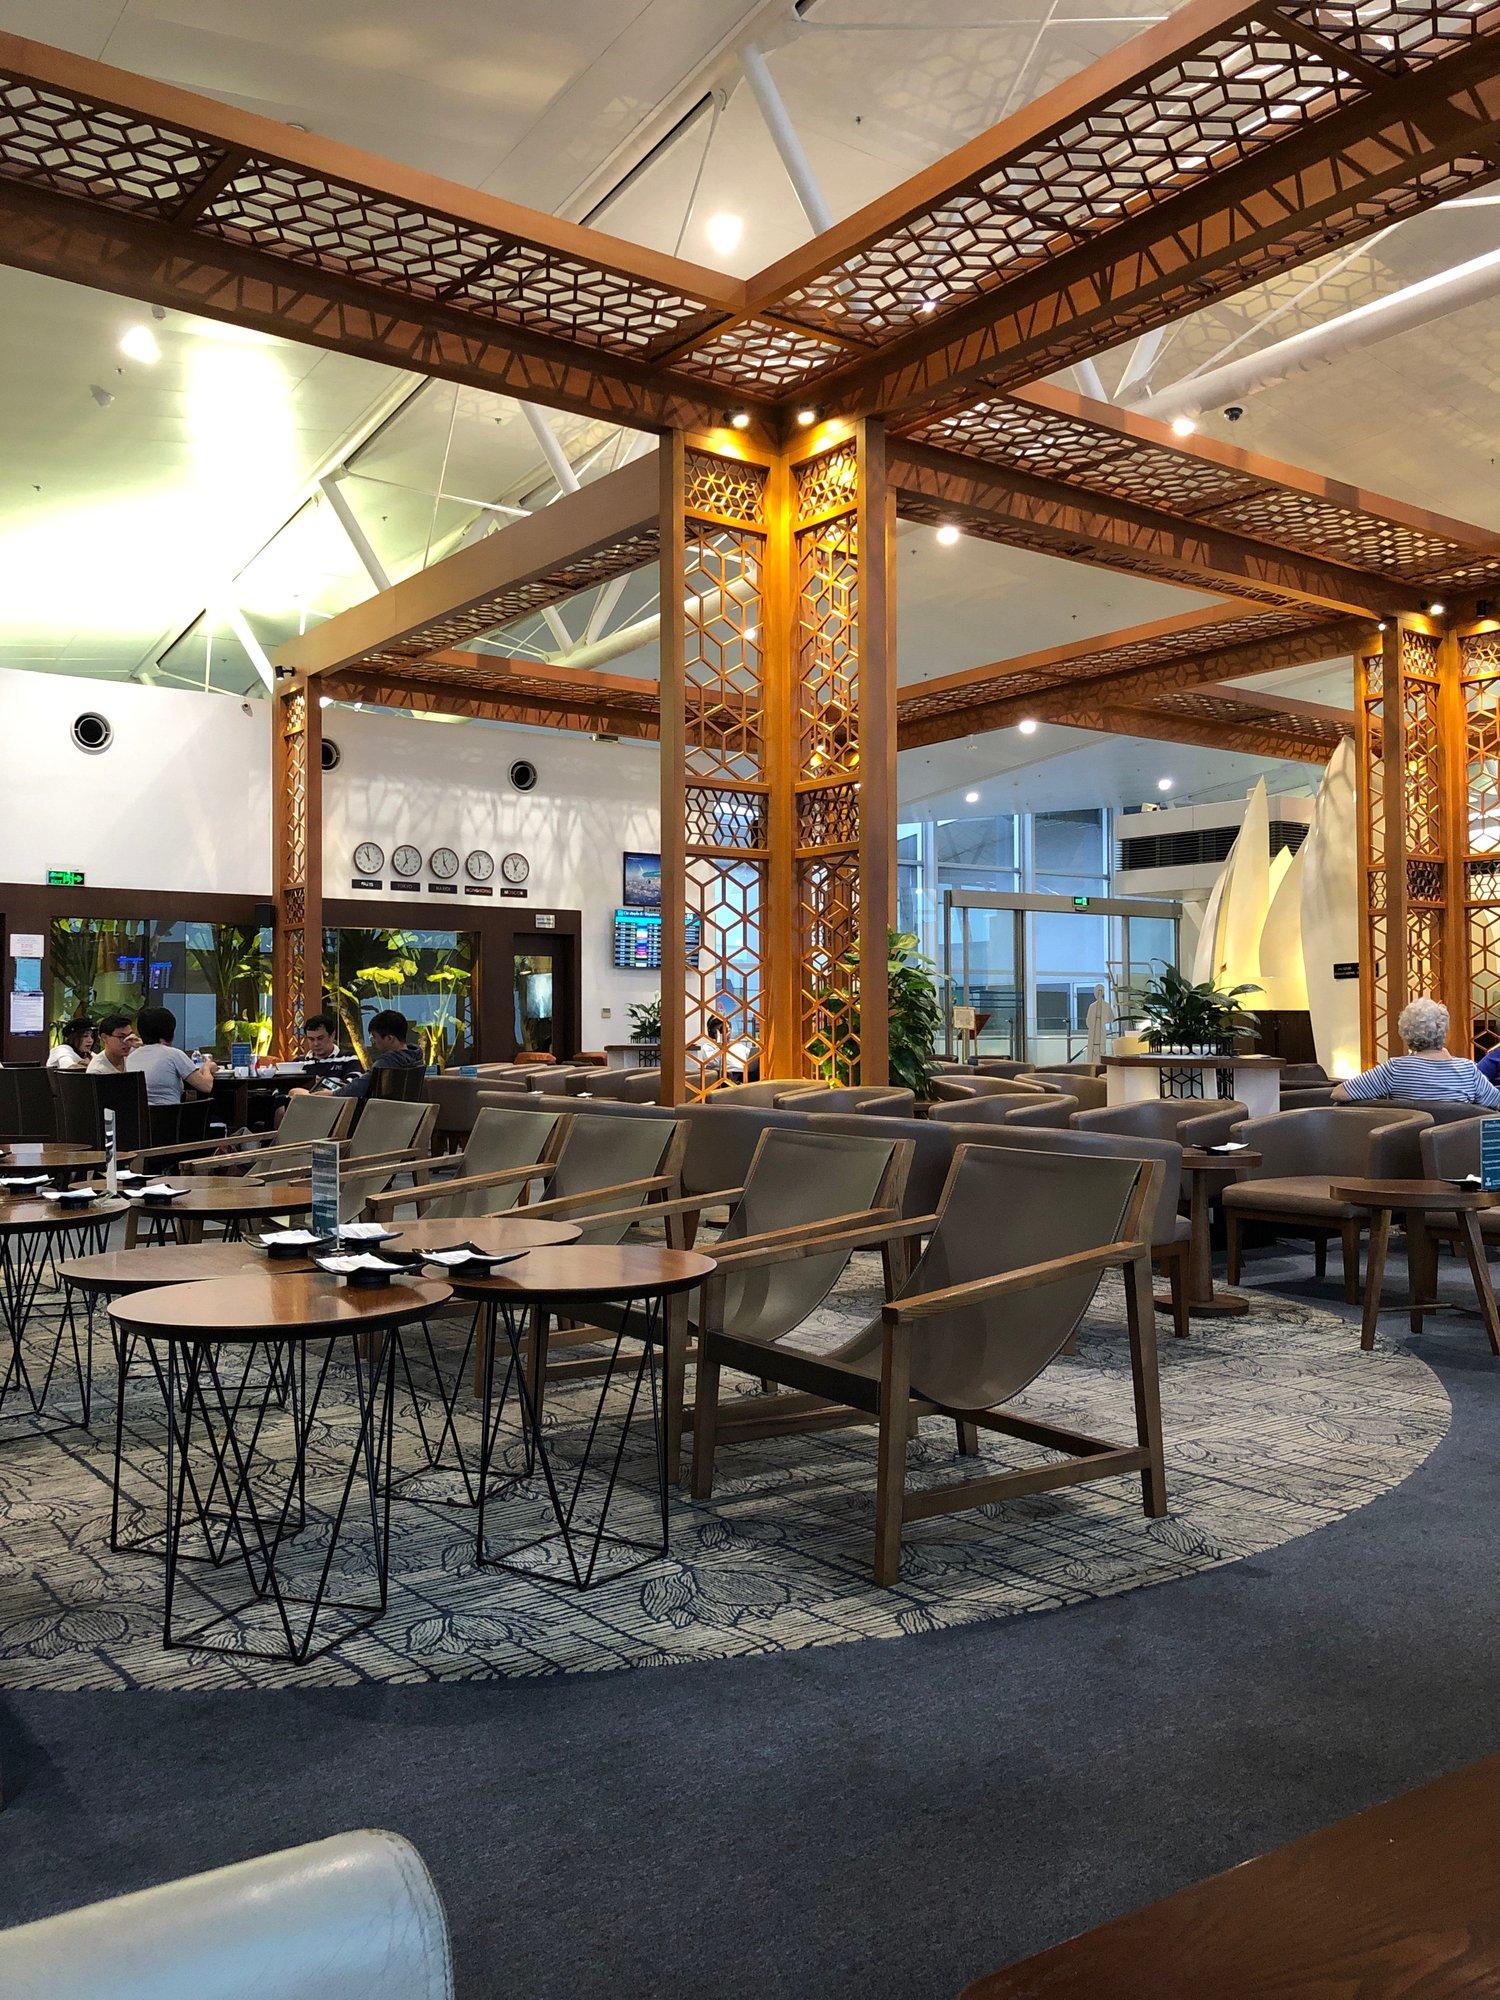 Vietnam Airlines Business Class Lounge image 14 of 16